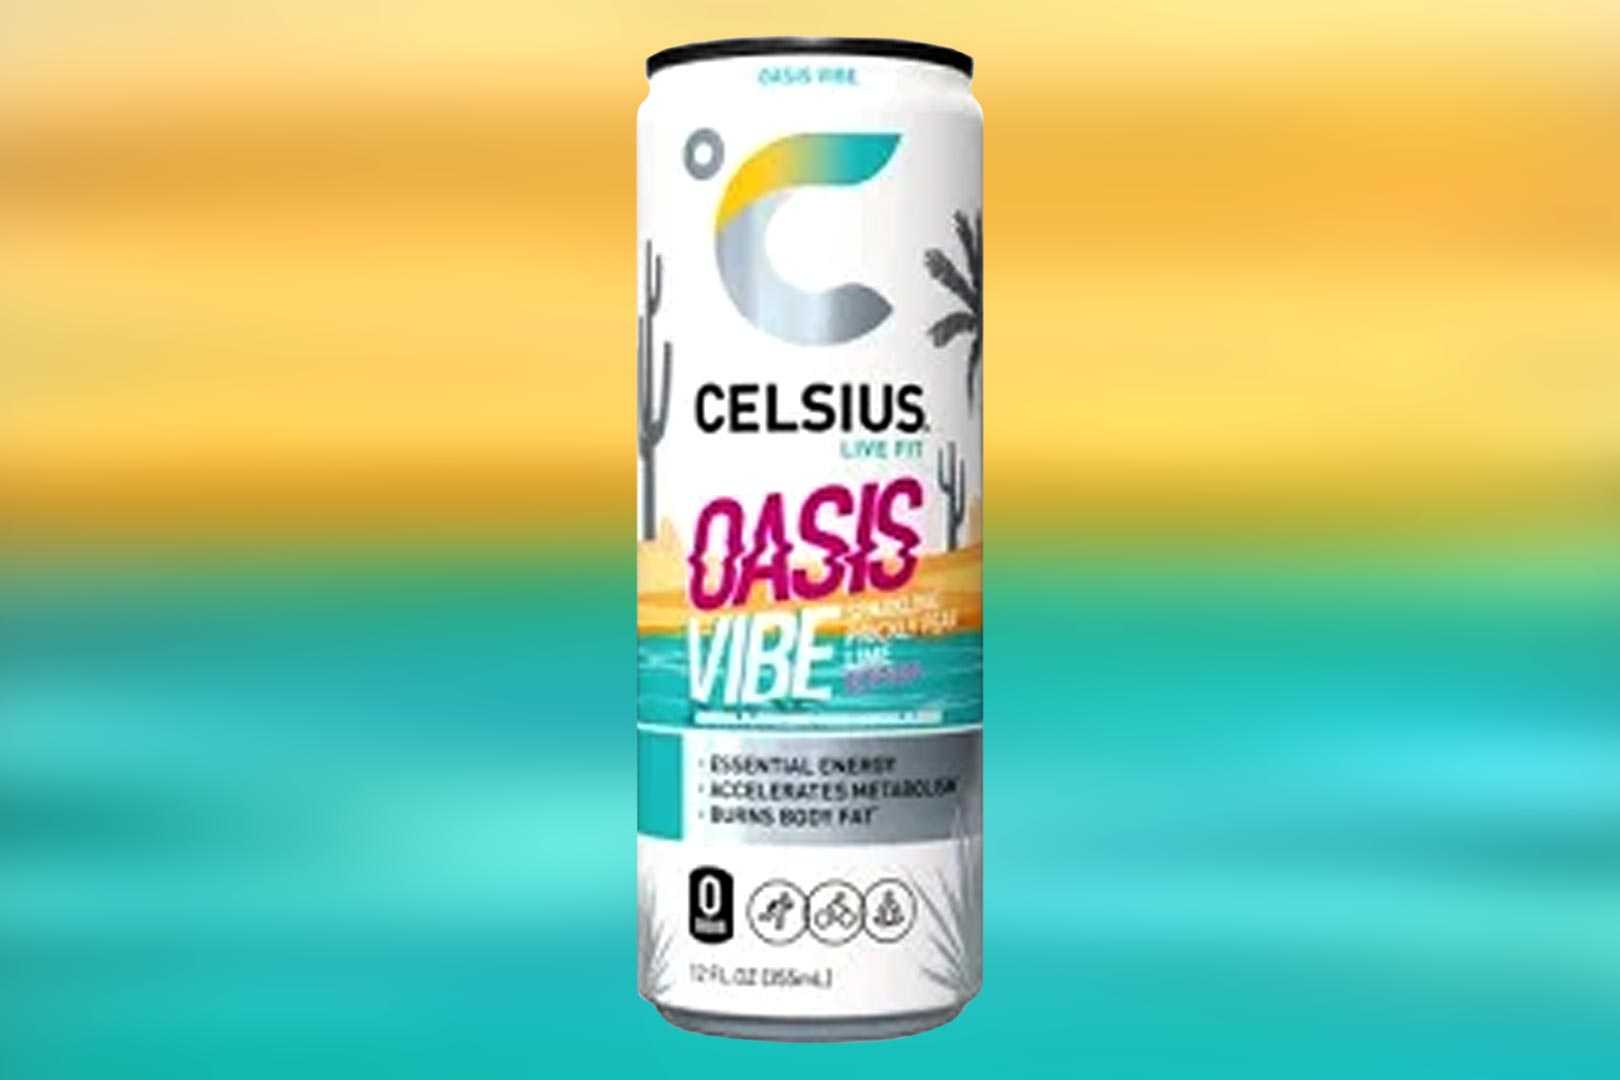 Oasis Vibe Celsius Energy Drink